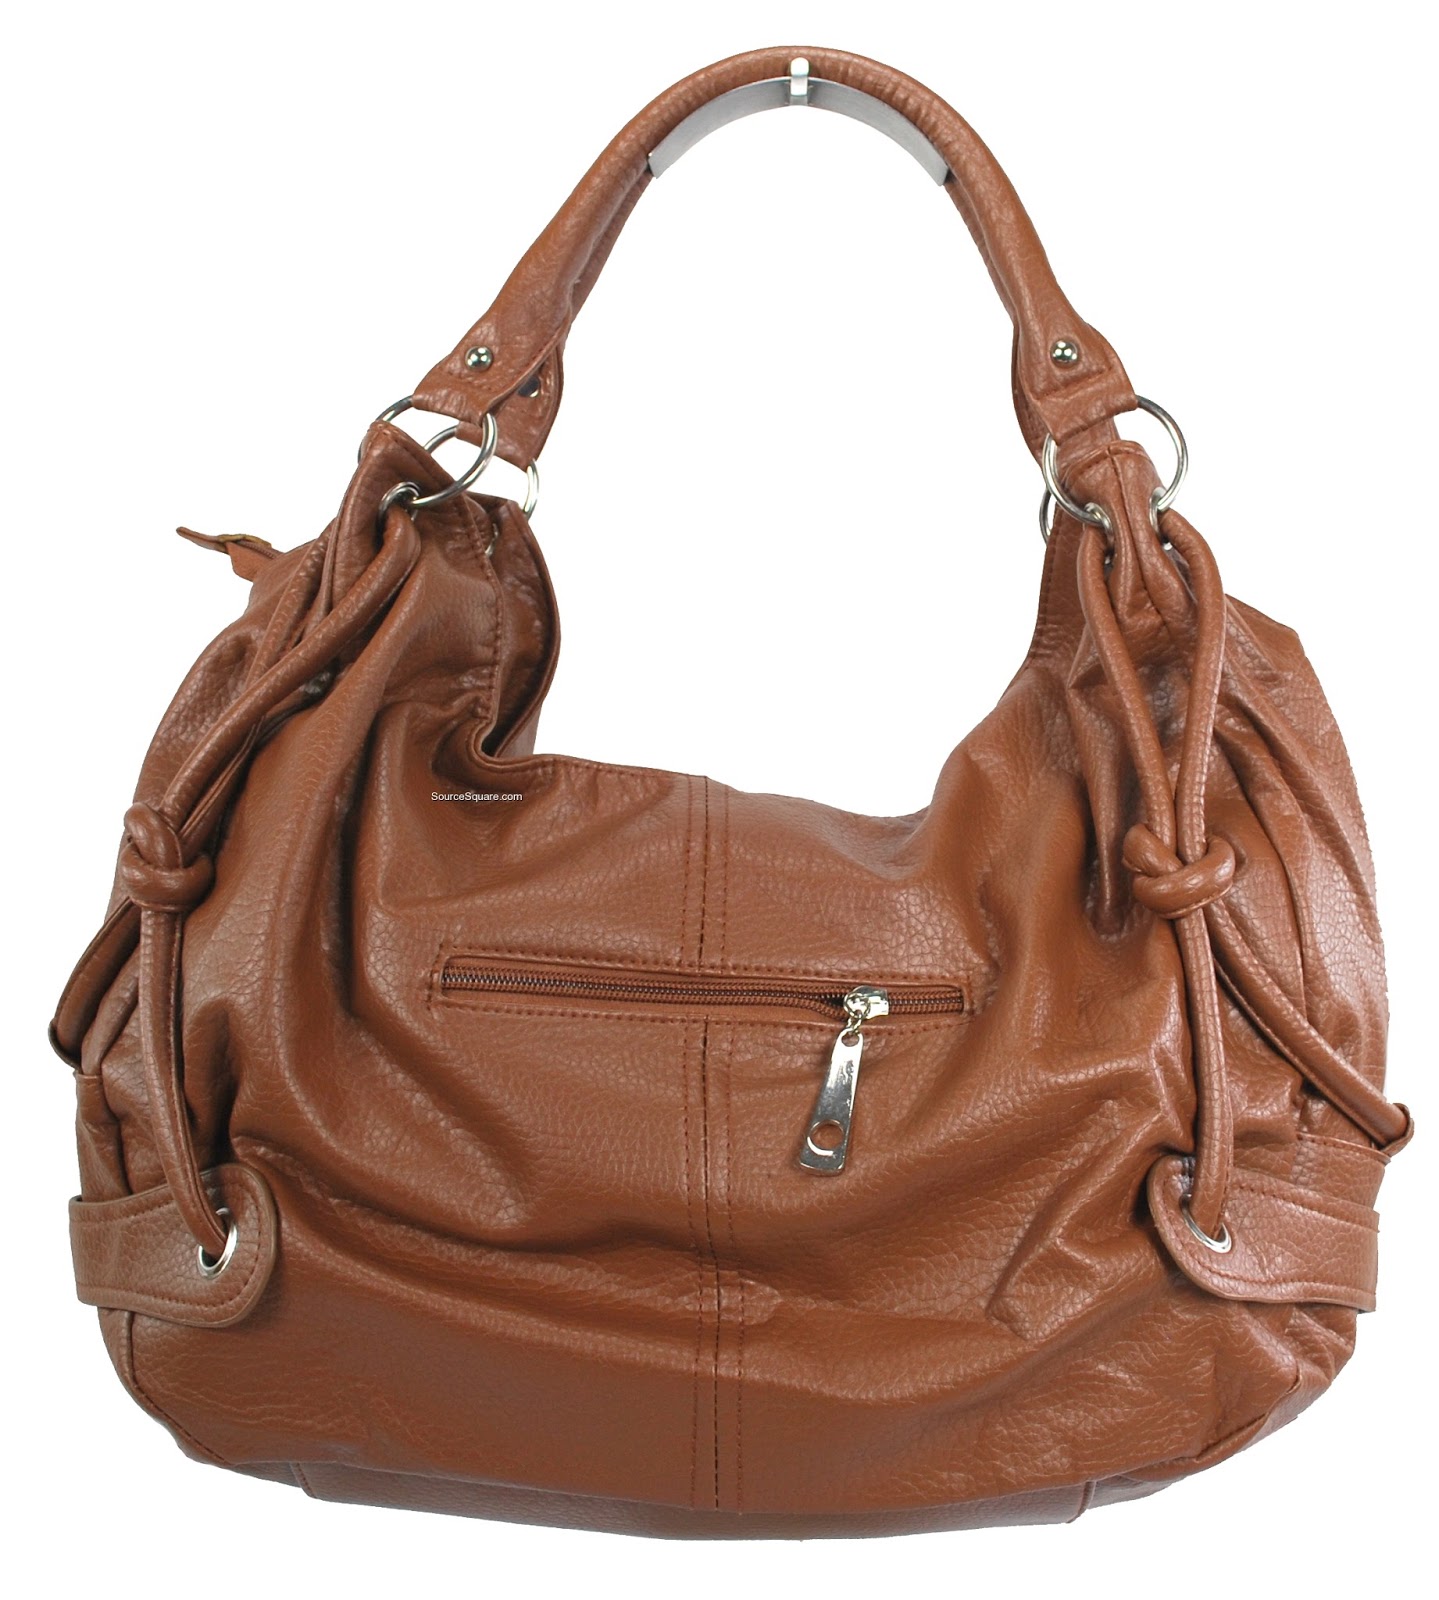 quality-leather-handbags-online-gallery